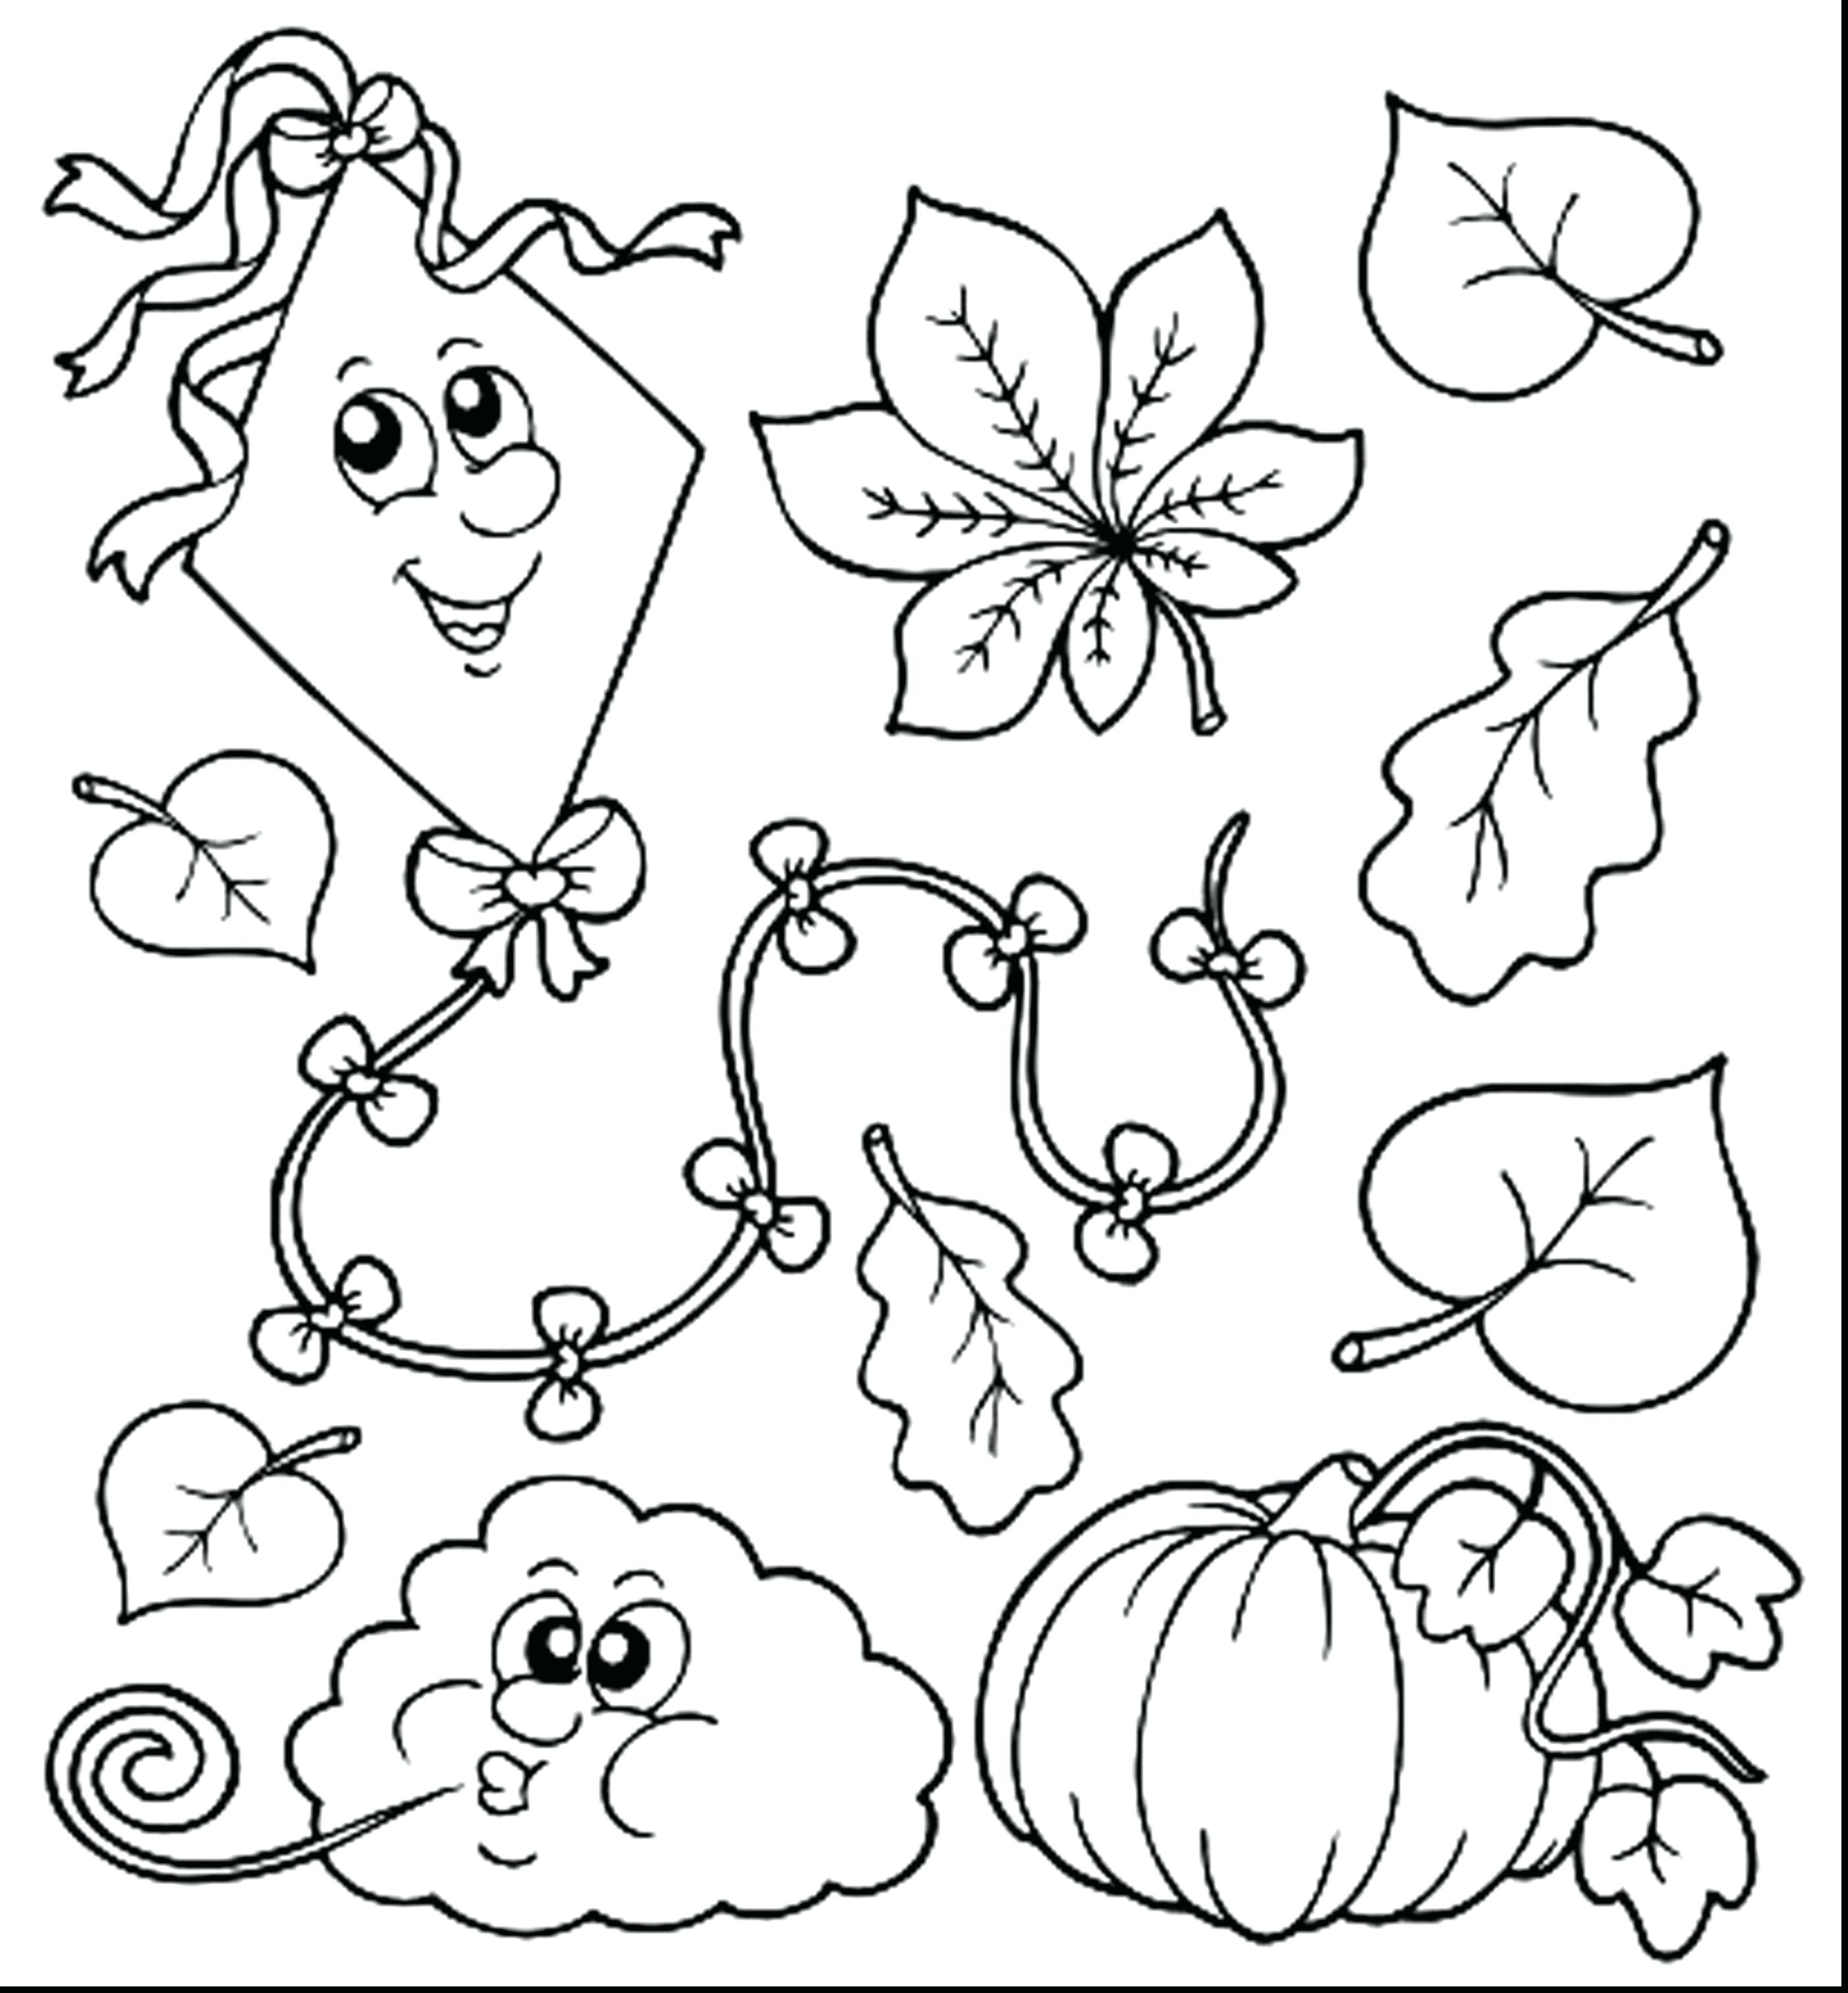 Free Coloring Pages For Elementary Students At GetColorings Free 